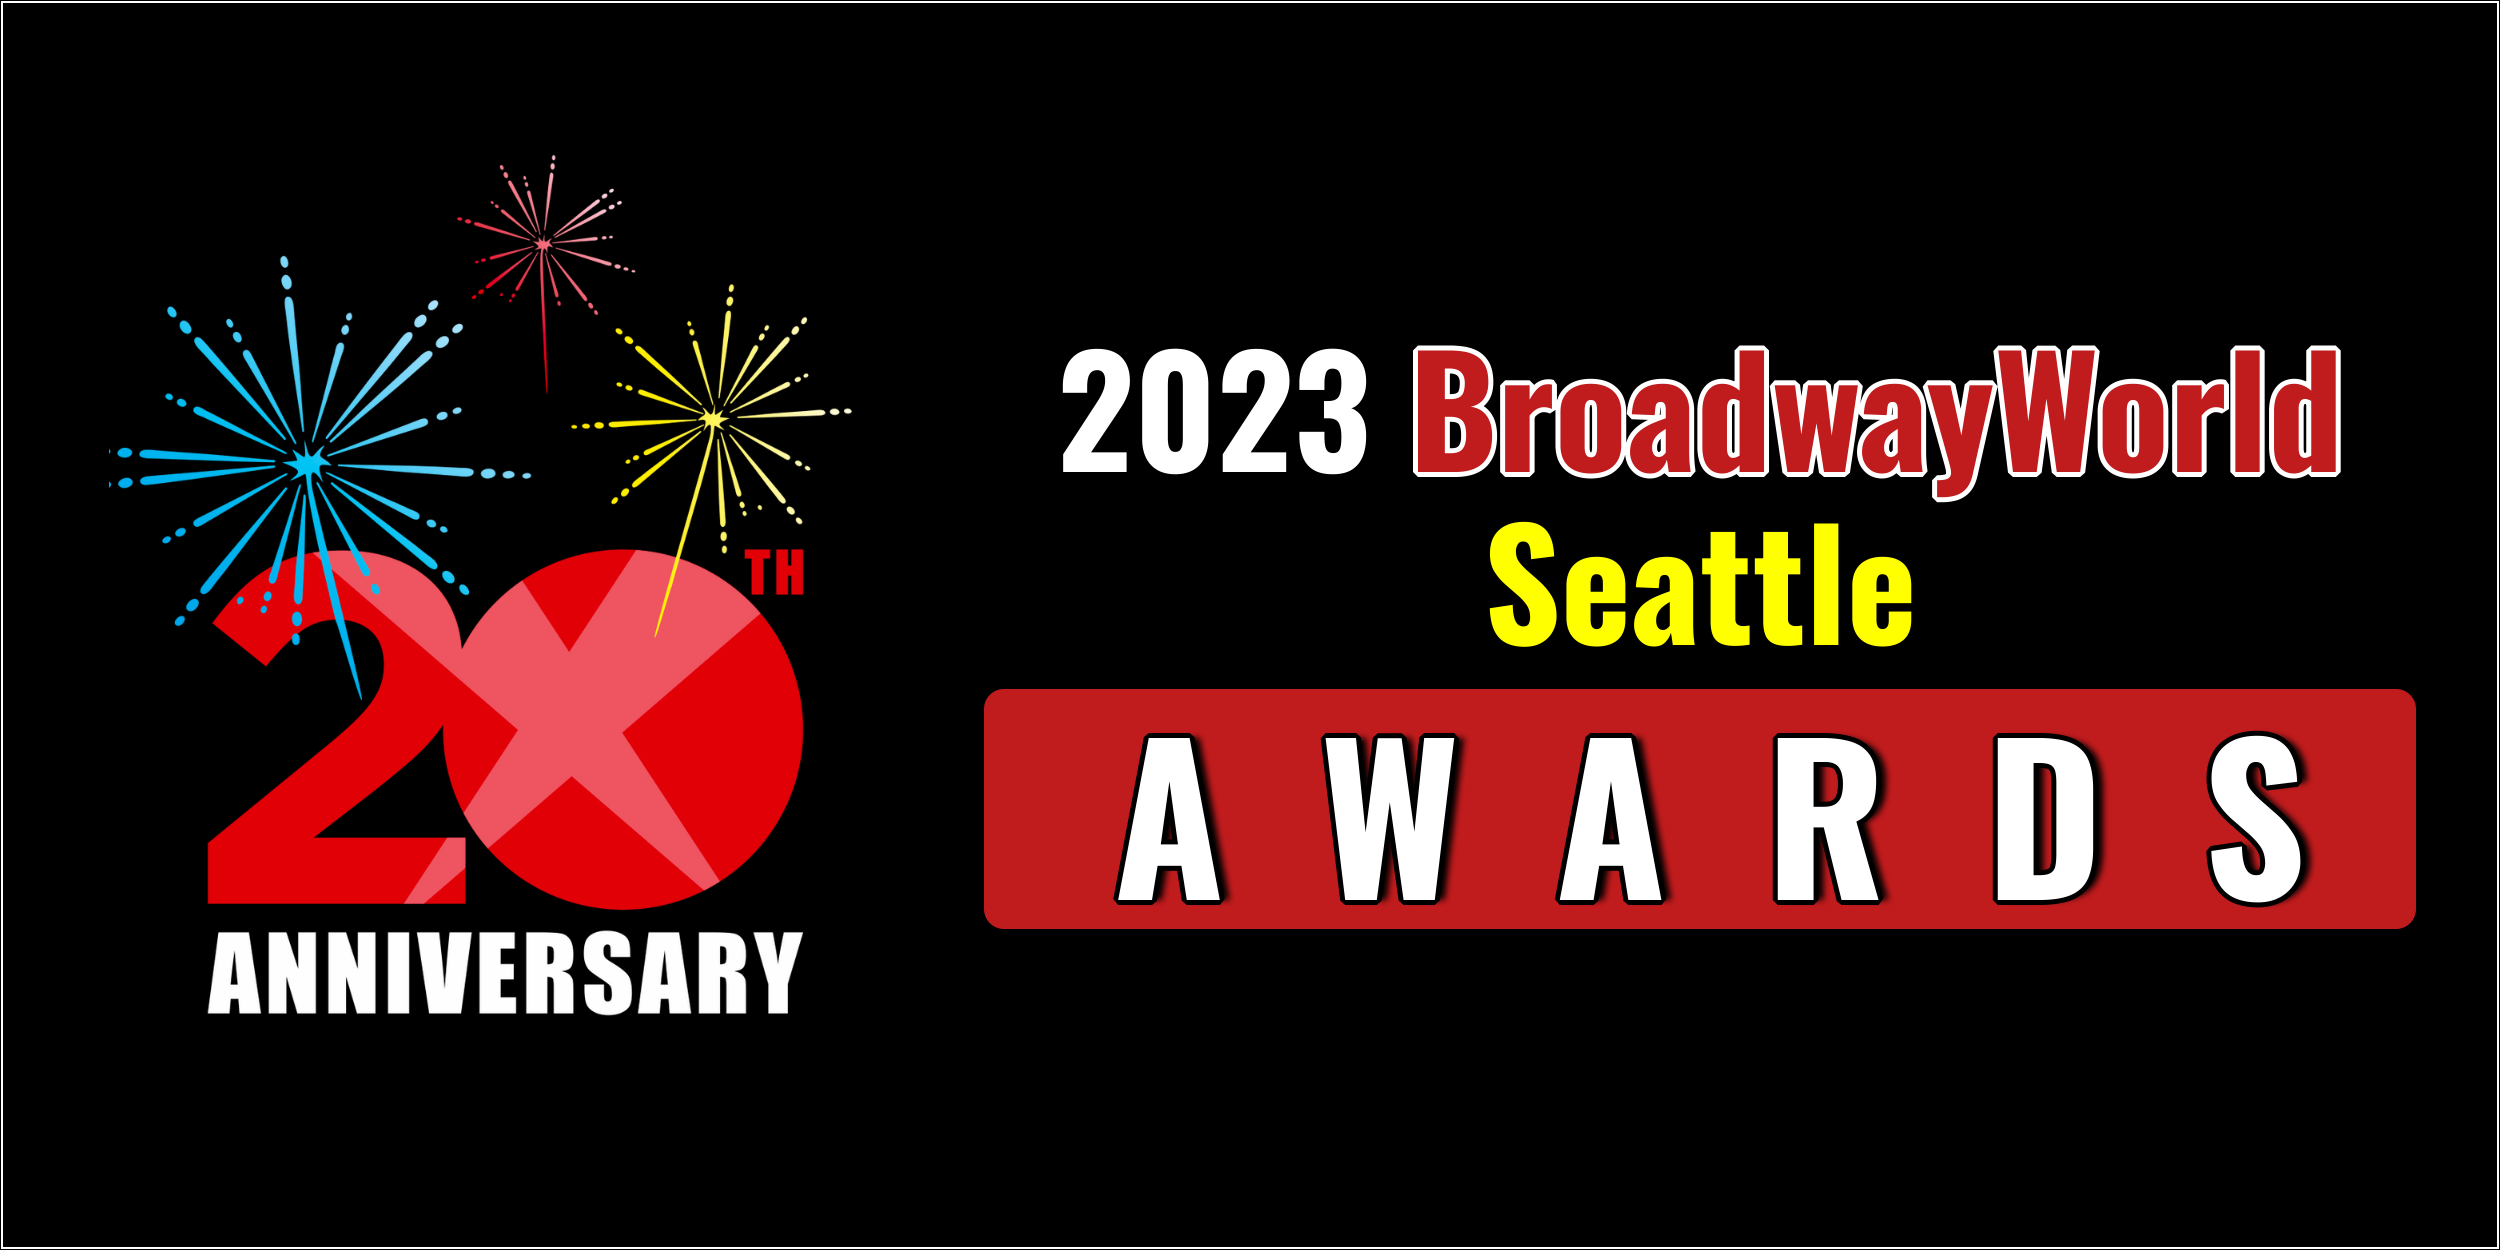 Latest Standings Announced For The 2023 BroadwayWorld Seattle Awards; AGATHA CHRISTIE'S MURDER ON THE ORIENT EXPRESS Leads Best Play! 